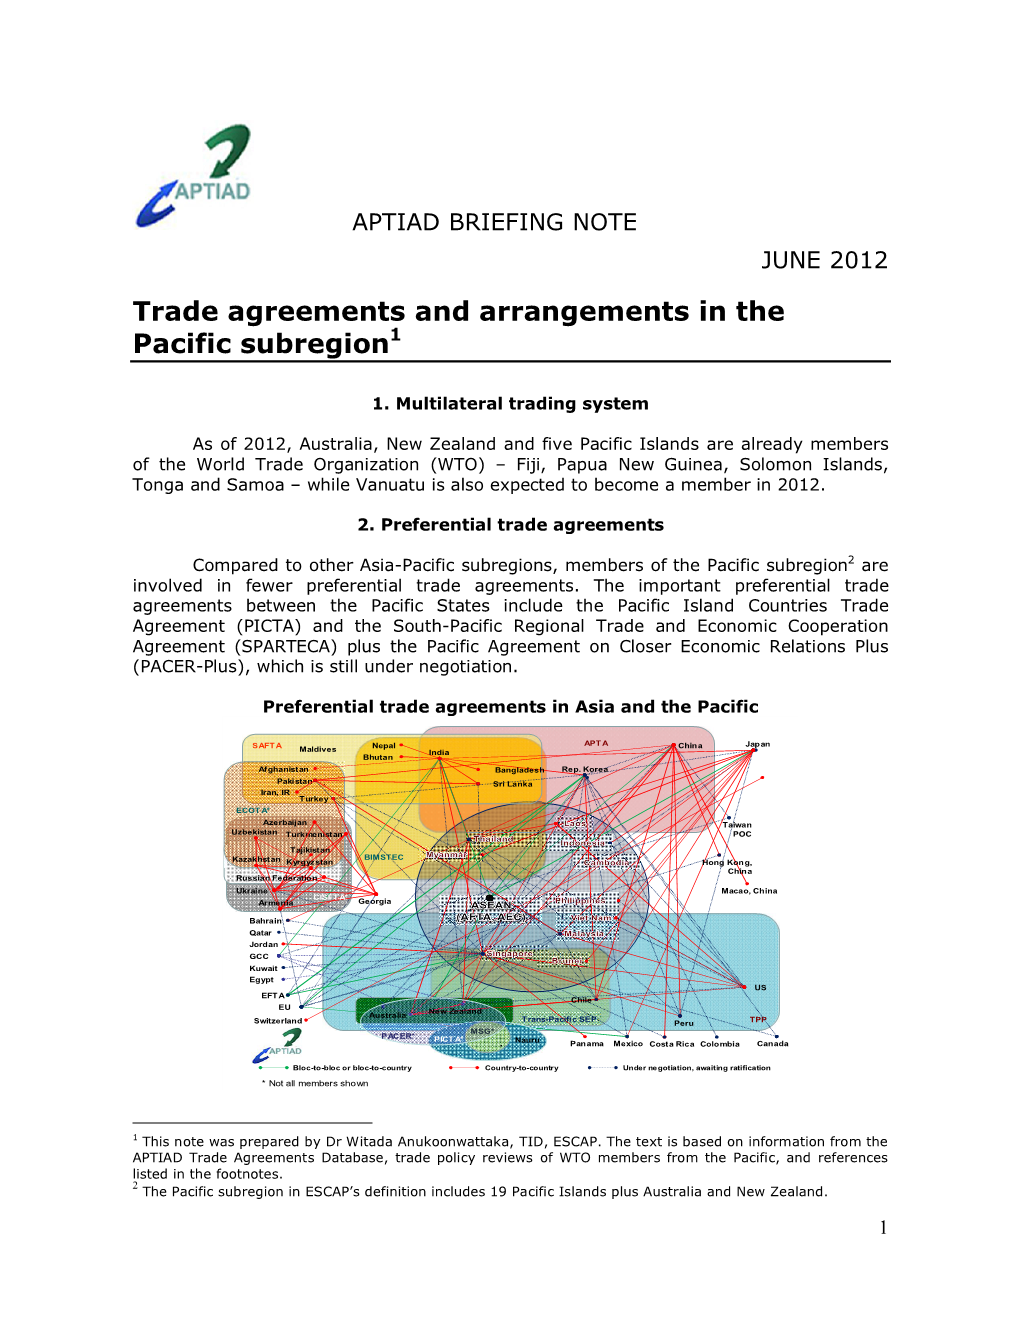 Trade Agreements and Arrangements in the Pacific Subregion1